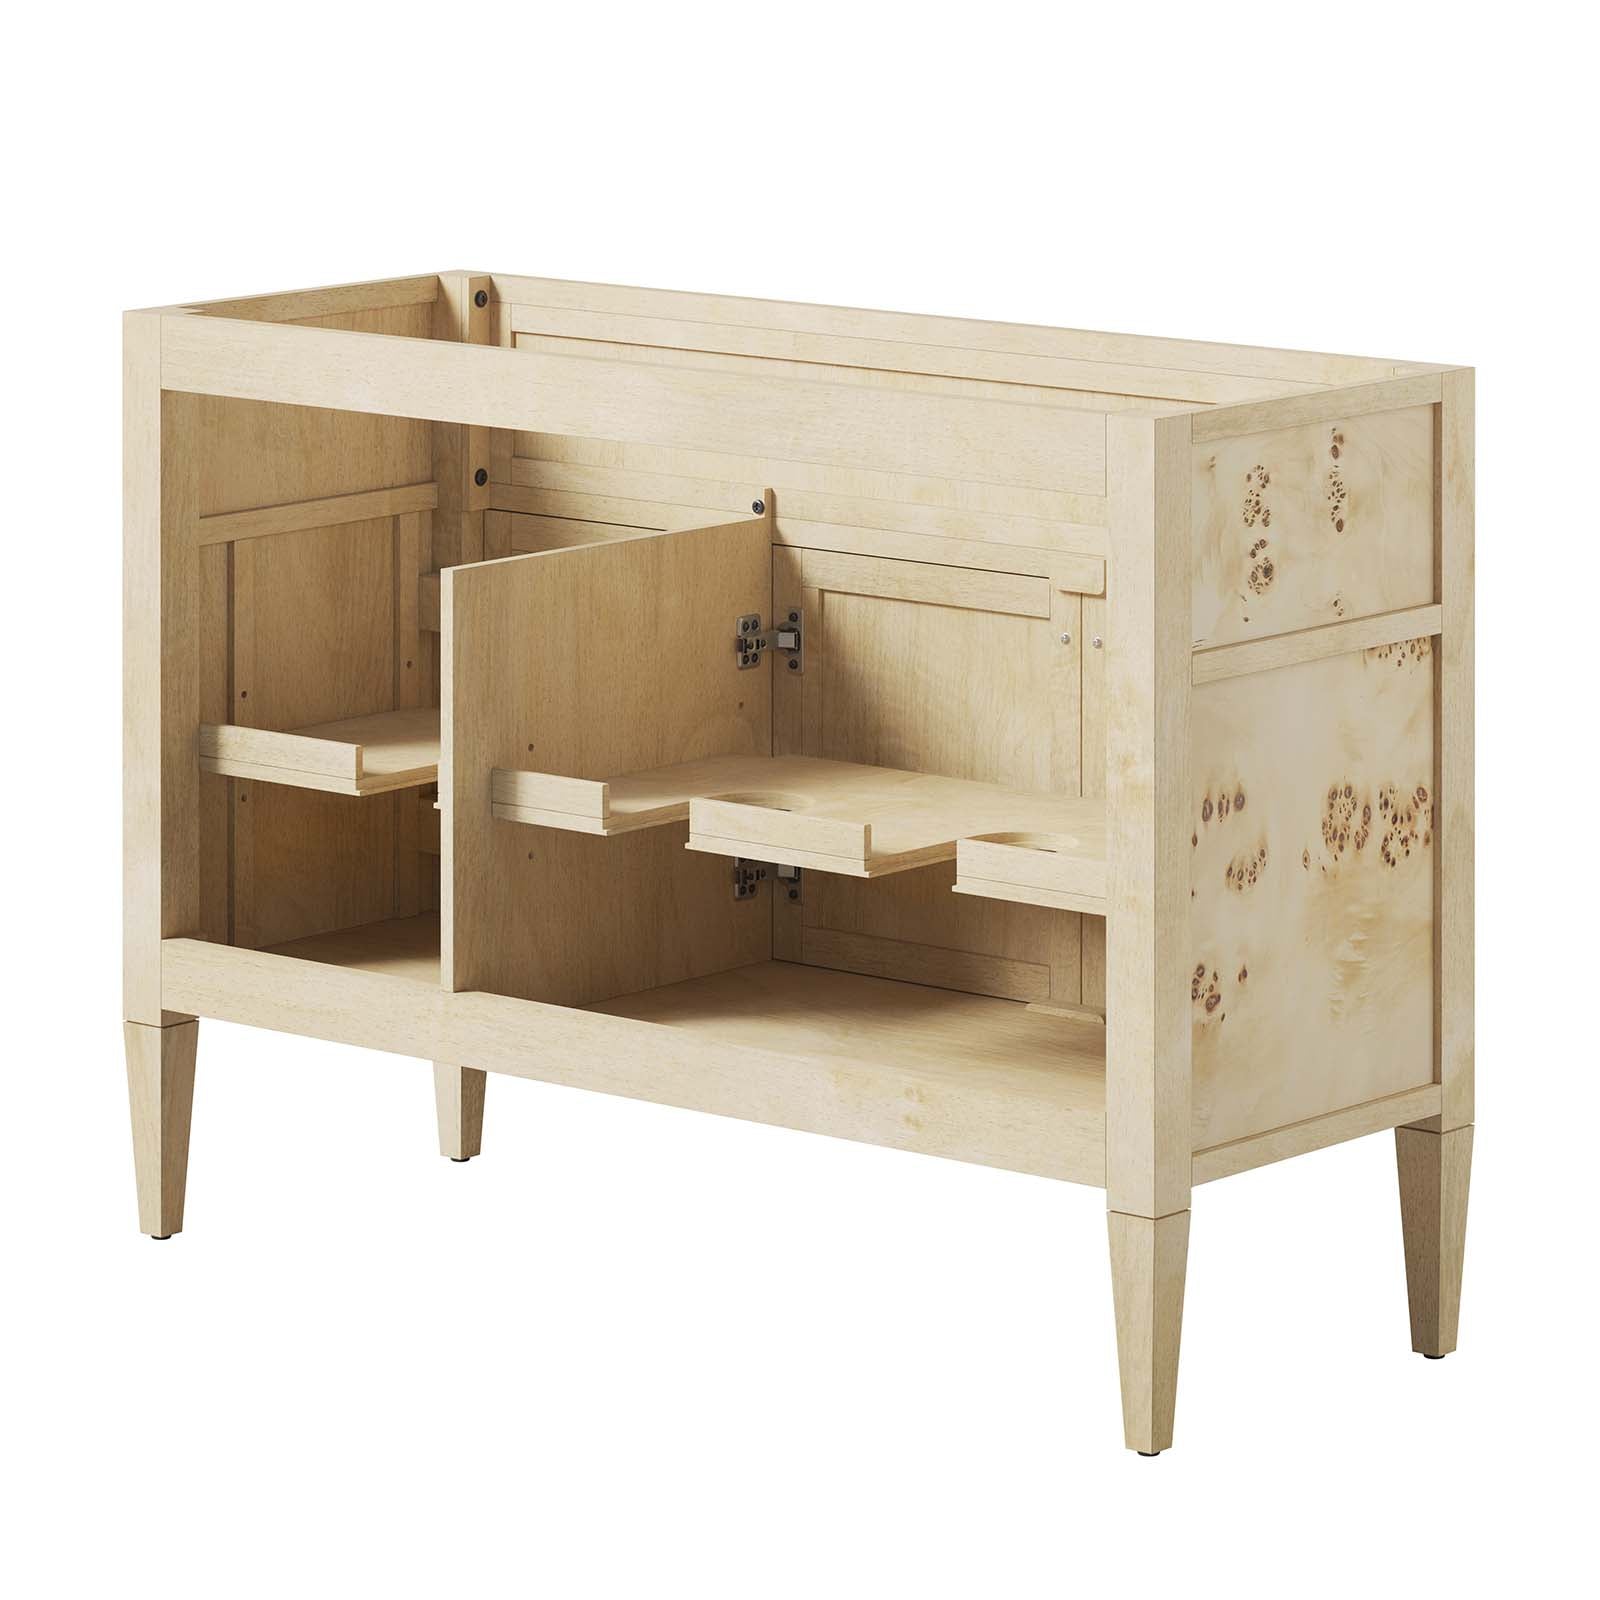 Elysian 48" Wood Bathroom Vanity Cabinet (Sink Basin Not Included) By Modway - EEI-6140 | Bathroom Accessories | Modway - 13